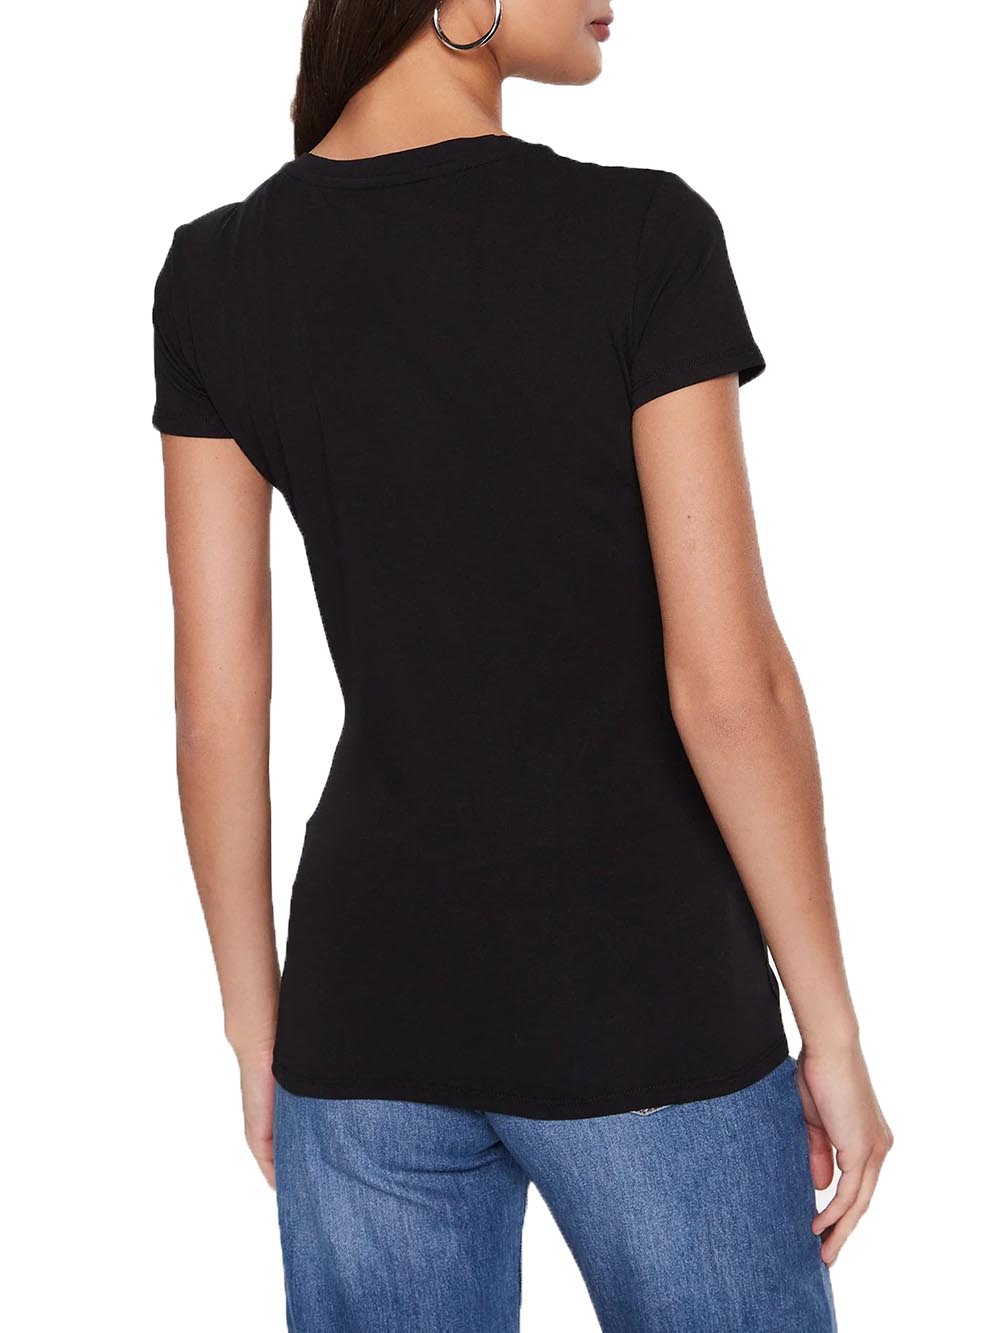 GUESS T-shirt Donna Nero